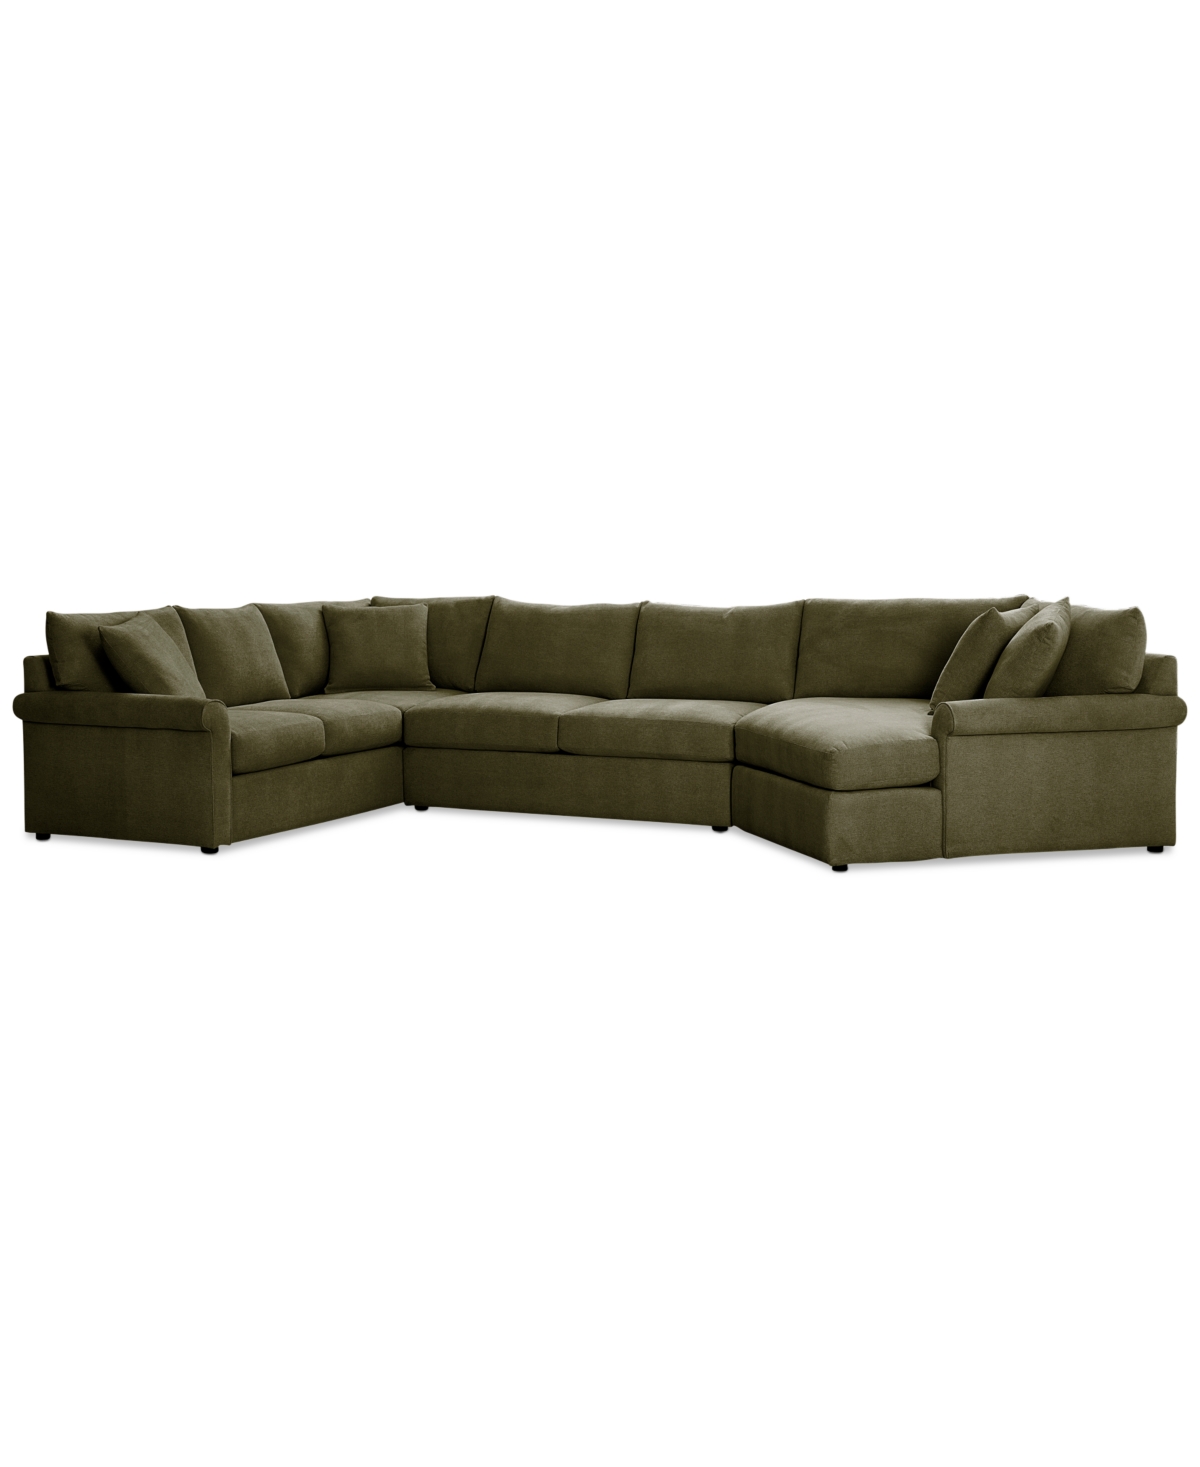 Furniture Wrenley 170" 3-pc. Fabric Sectional Cuddler Chaise Sofa, Created For Macy's In Olive